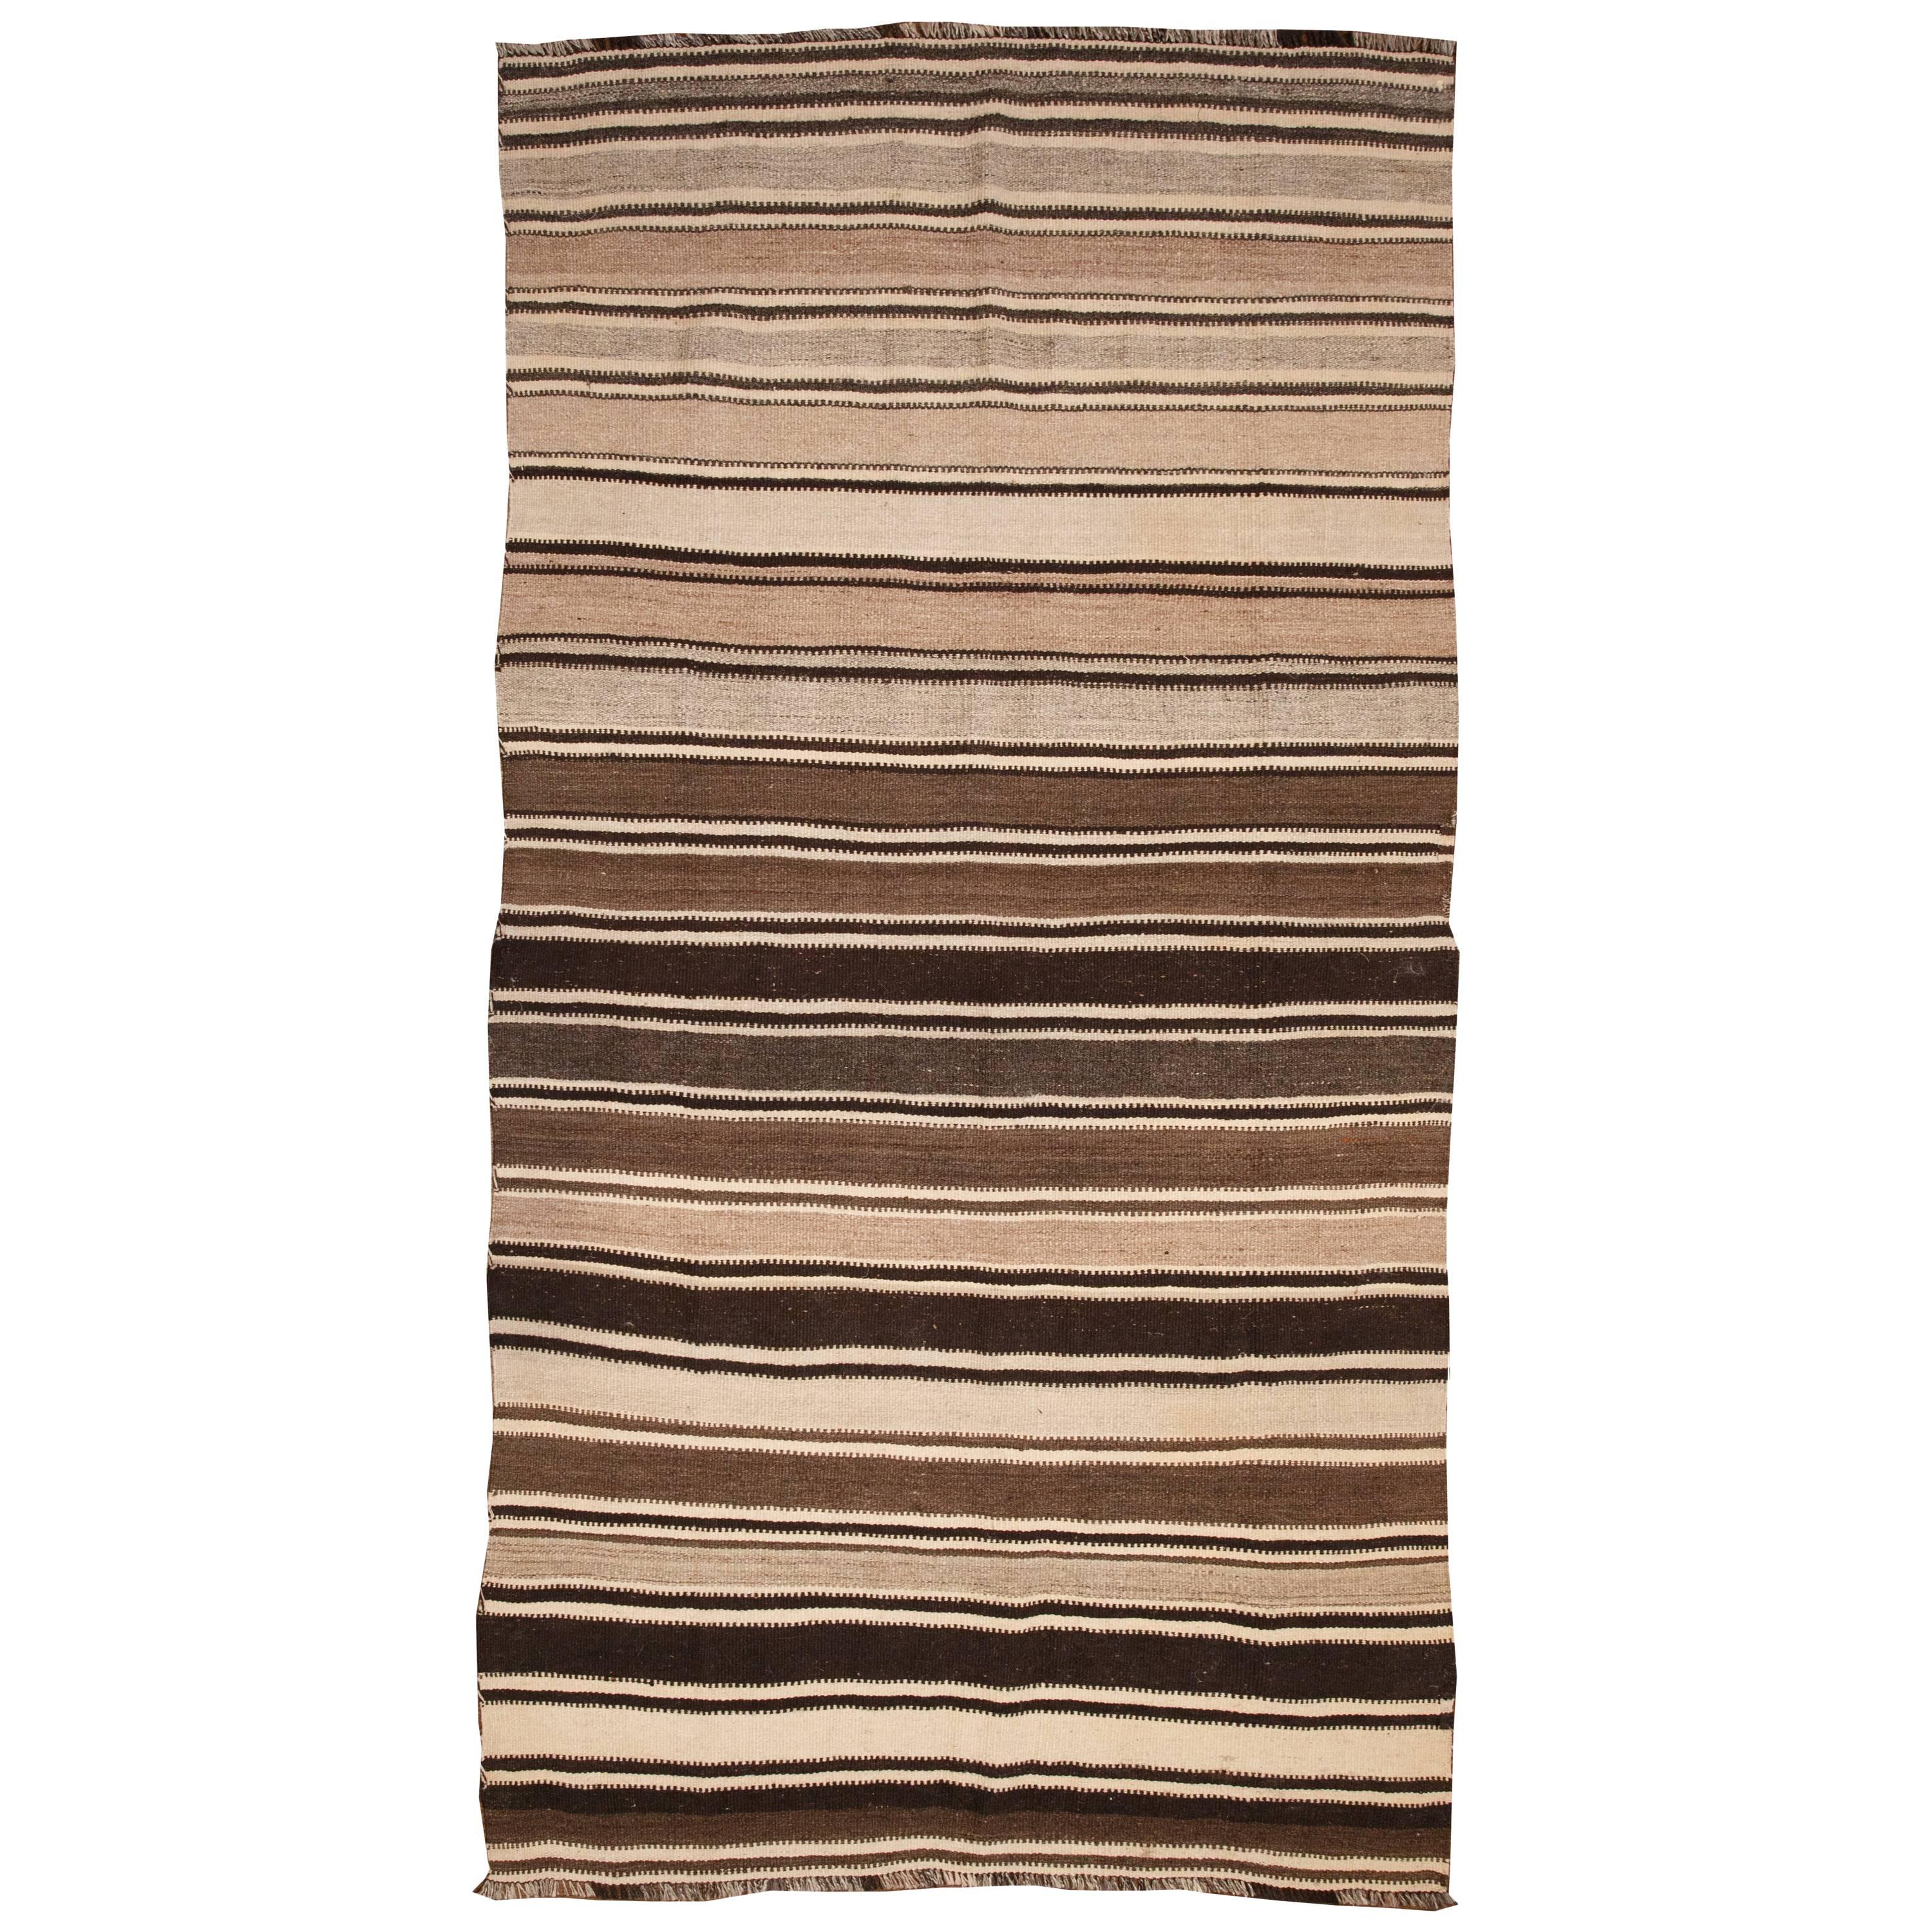 20th Century, Striped Kilim Rug from Afghanistan